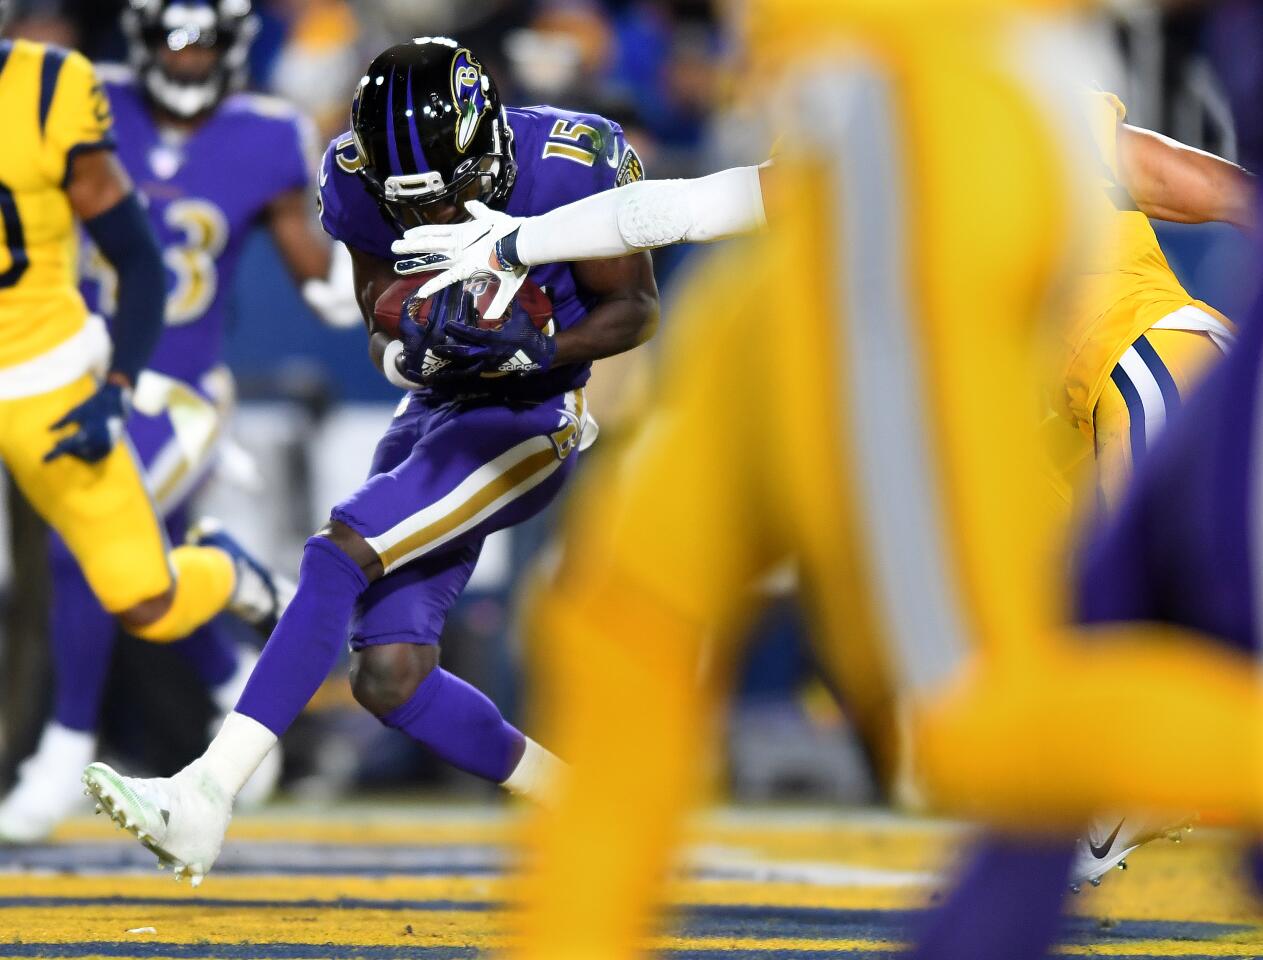 Ravens receiver Marquise Brown catches a touchdown pass against the Rams during the first quarter of a game Nov. 25 at the Coliseum.